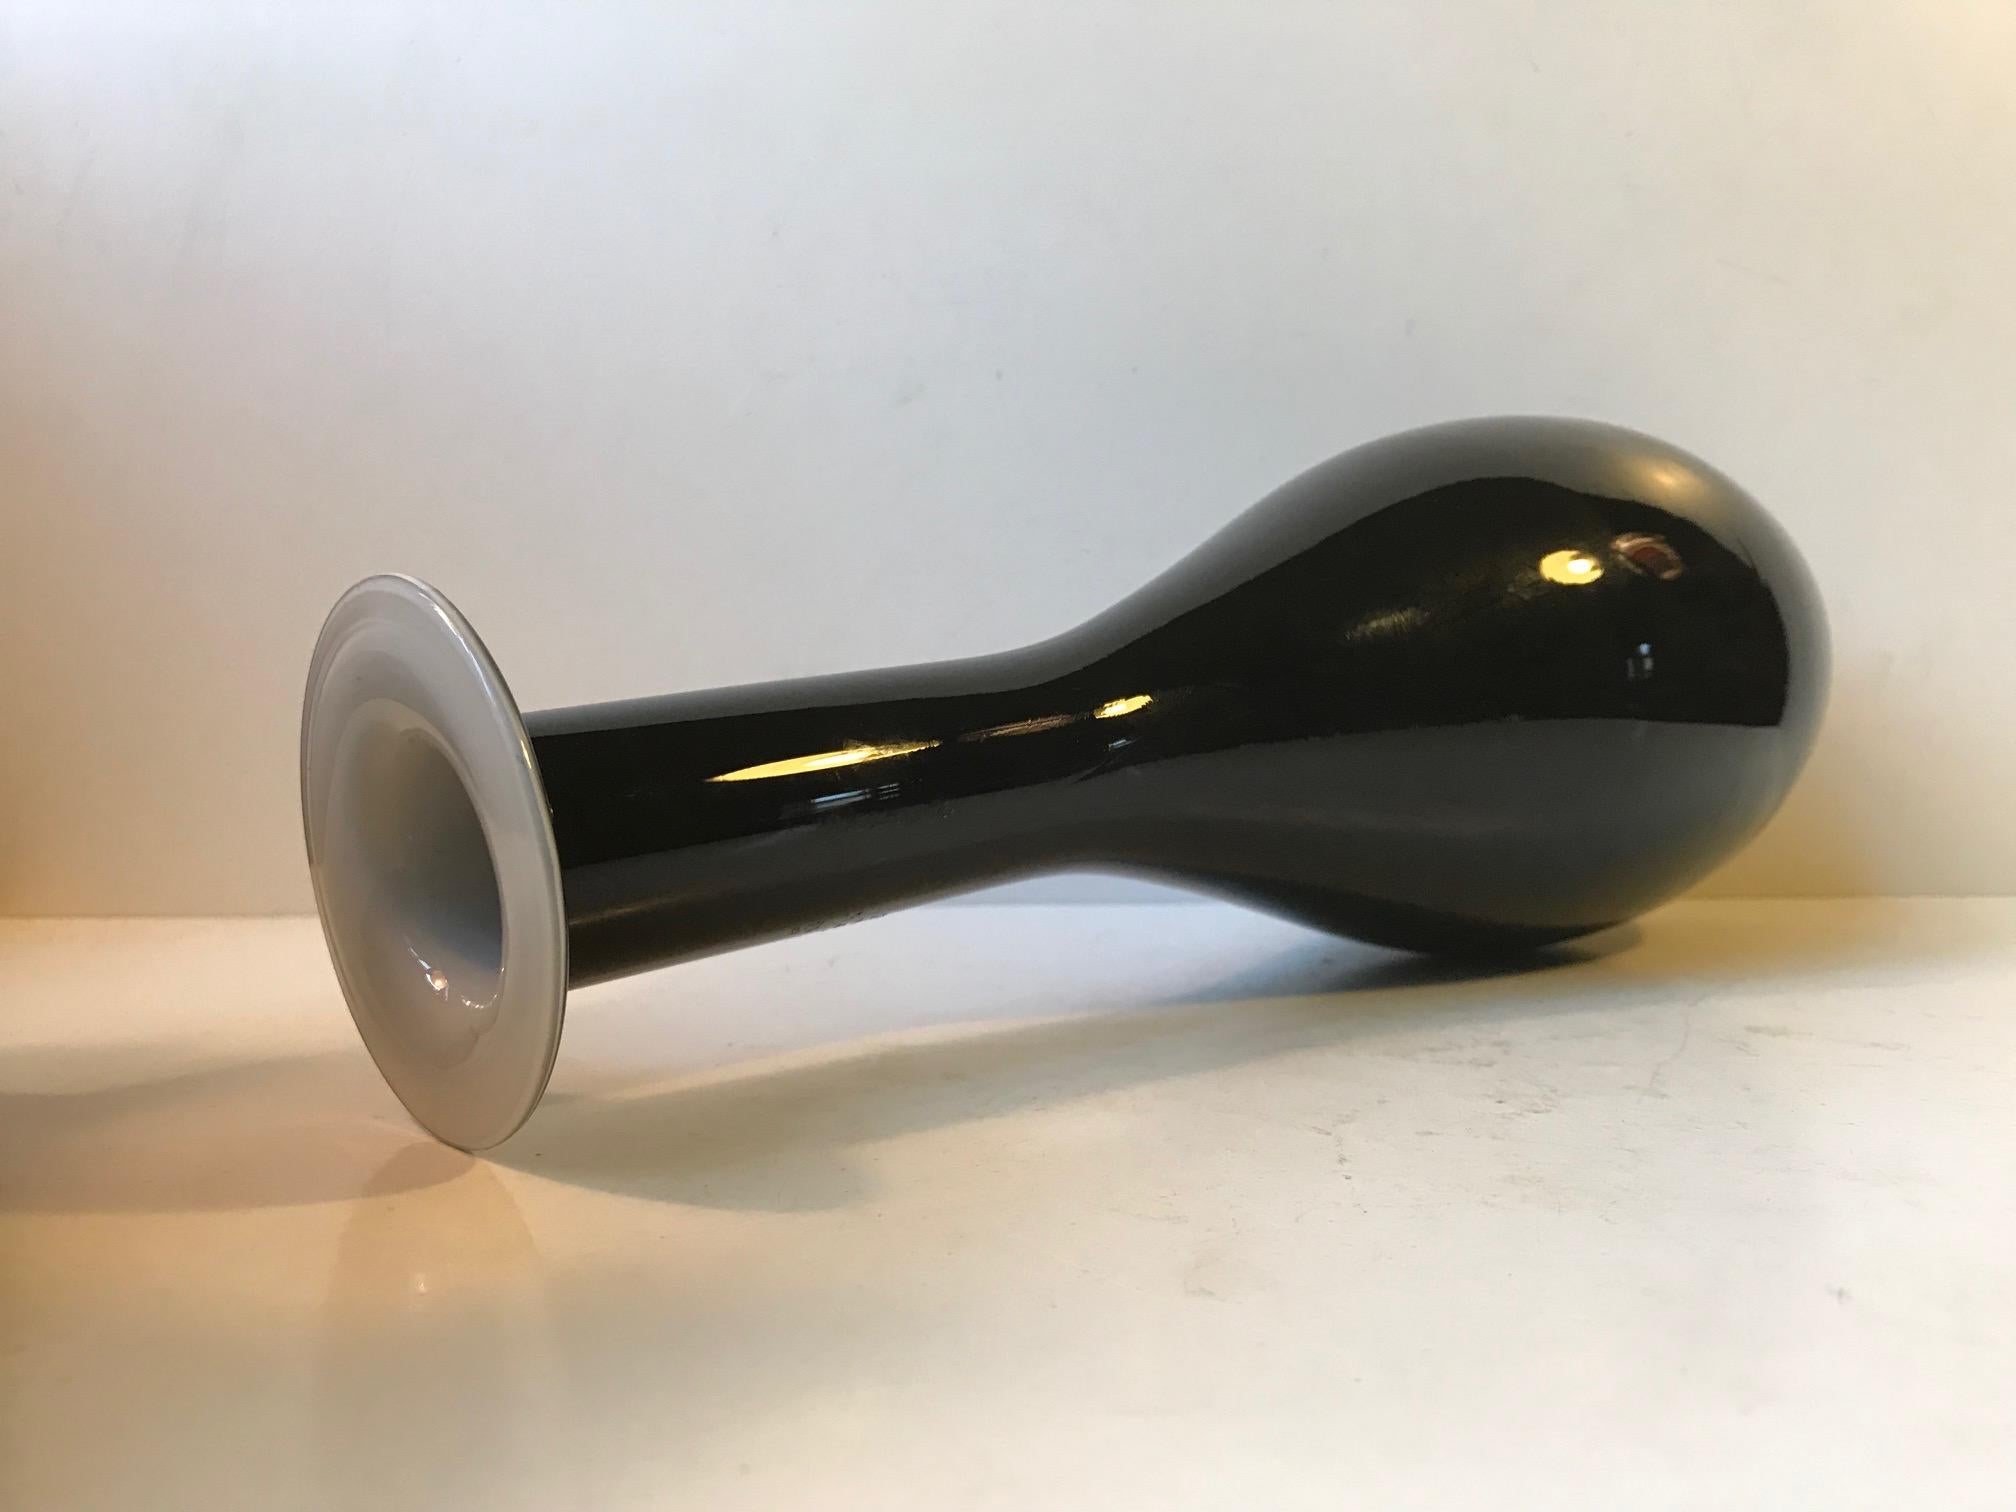 - Large organically shaped hand blown glass vase
- Made of cased black glass with an interior in opaline glass
- Made by Stelvia in Italy during the 1960s or 70s
- In a style reminiscent of Venini, Otto Brauer, and Michael E. Bang
- Free World wide